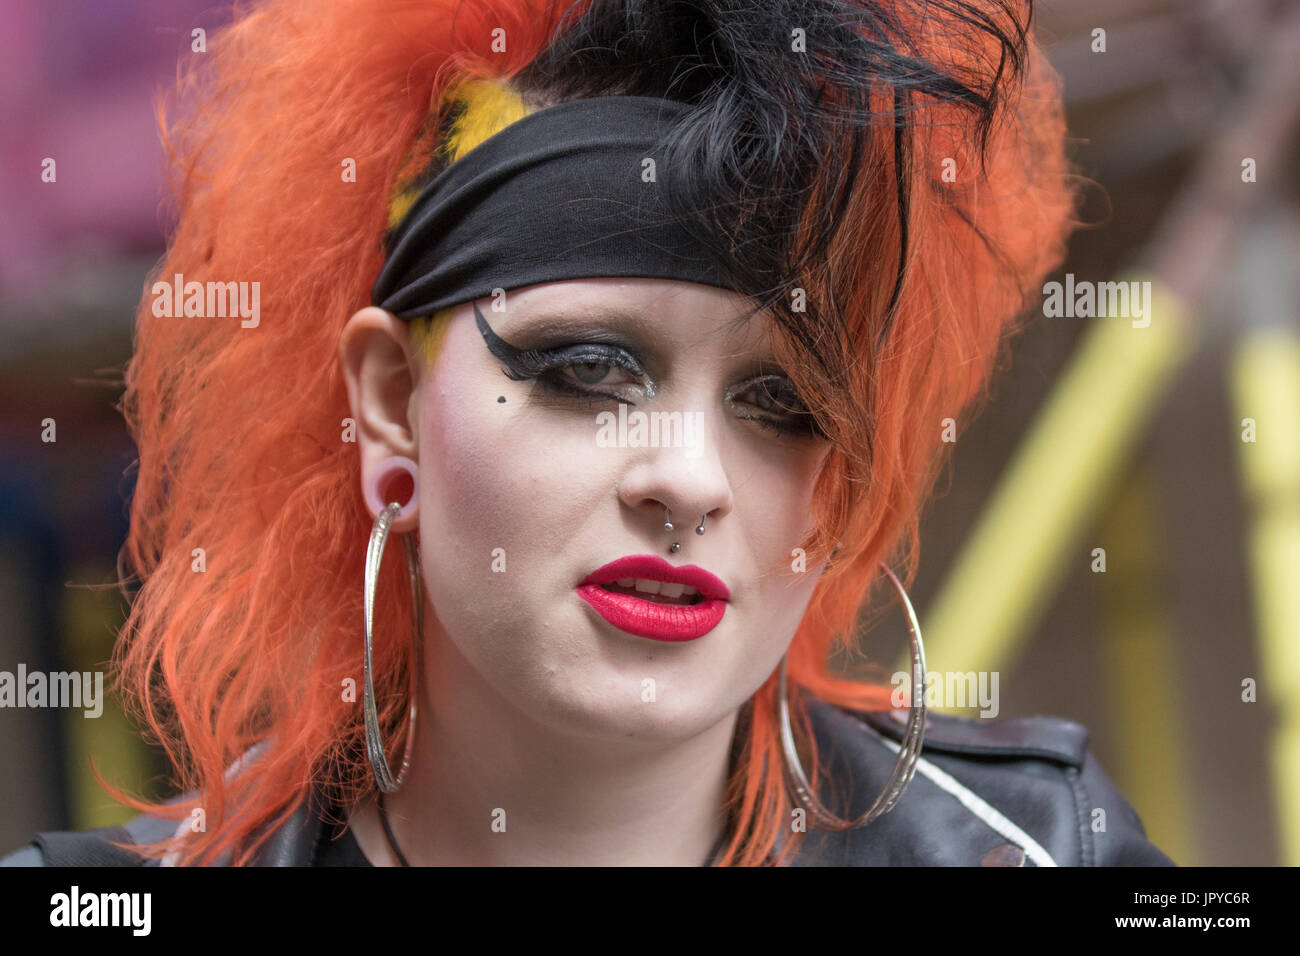 Ear stretching, lobe 'gauging' in Blackpool, Lancashire, UK. Iska with  pierced ears, plastic inserts and wearing large ear rings, from Birminham.  The Rebellion Festival world's largest punk festival begins as thousands of